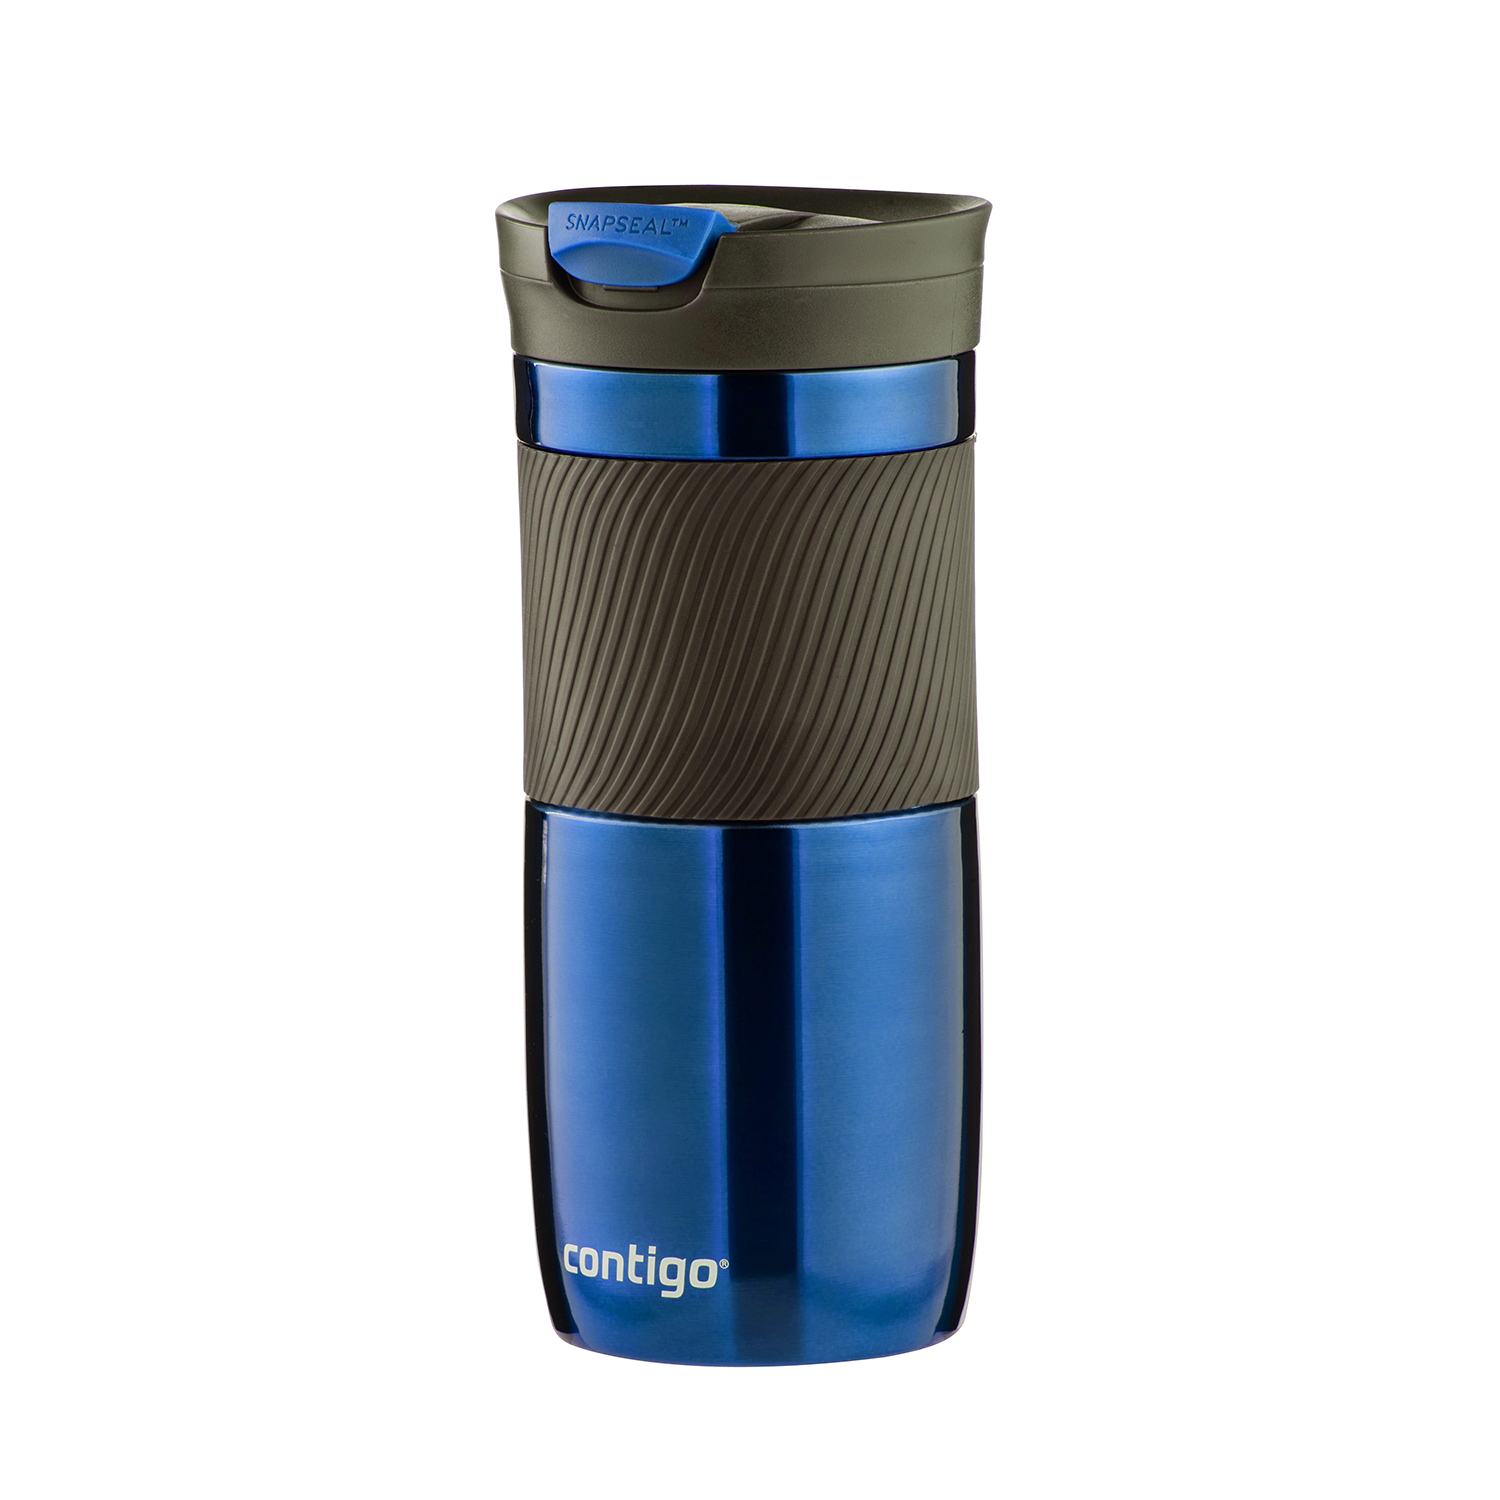 Autoseal Transit Travel Mug 16 Oz., Stainless Steel with Blue